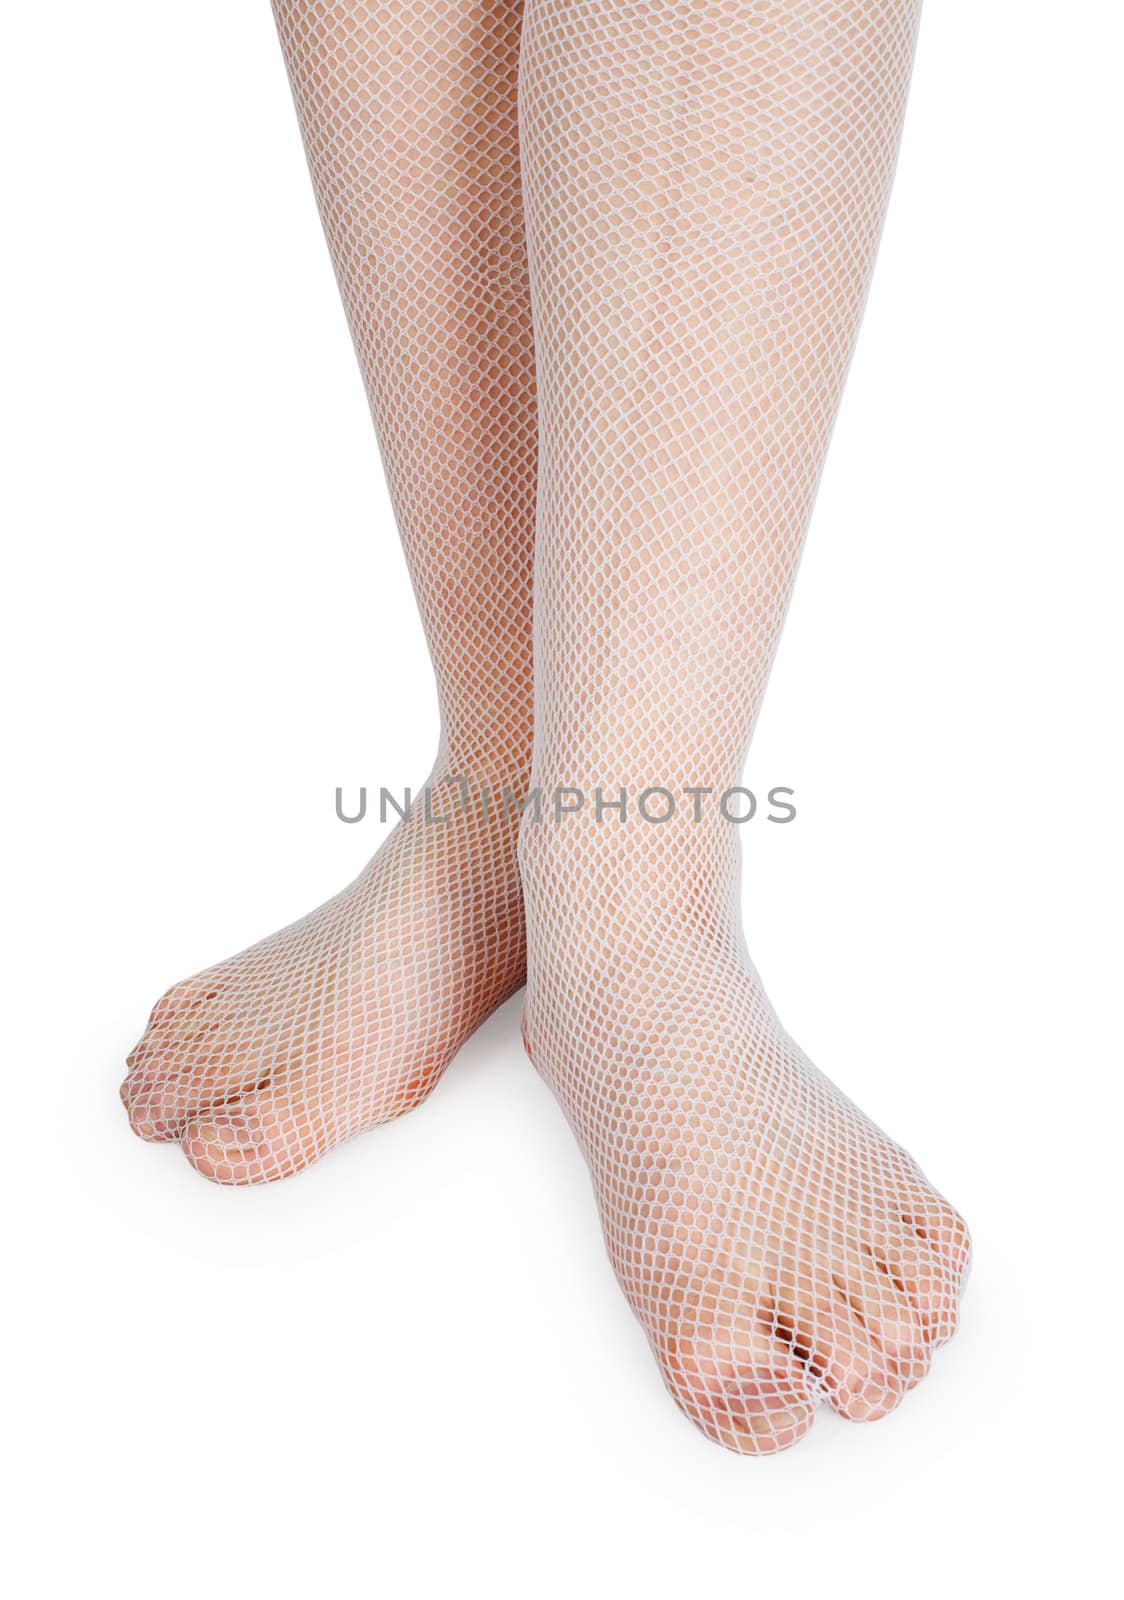 Female legs dressed in fashion stockings, isolated on a white background